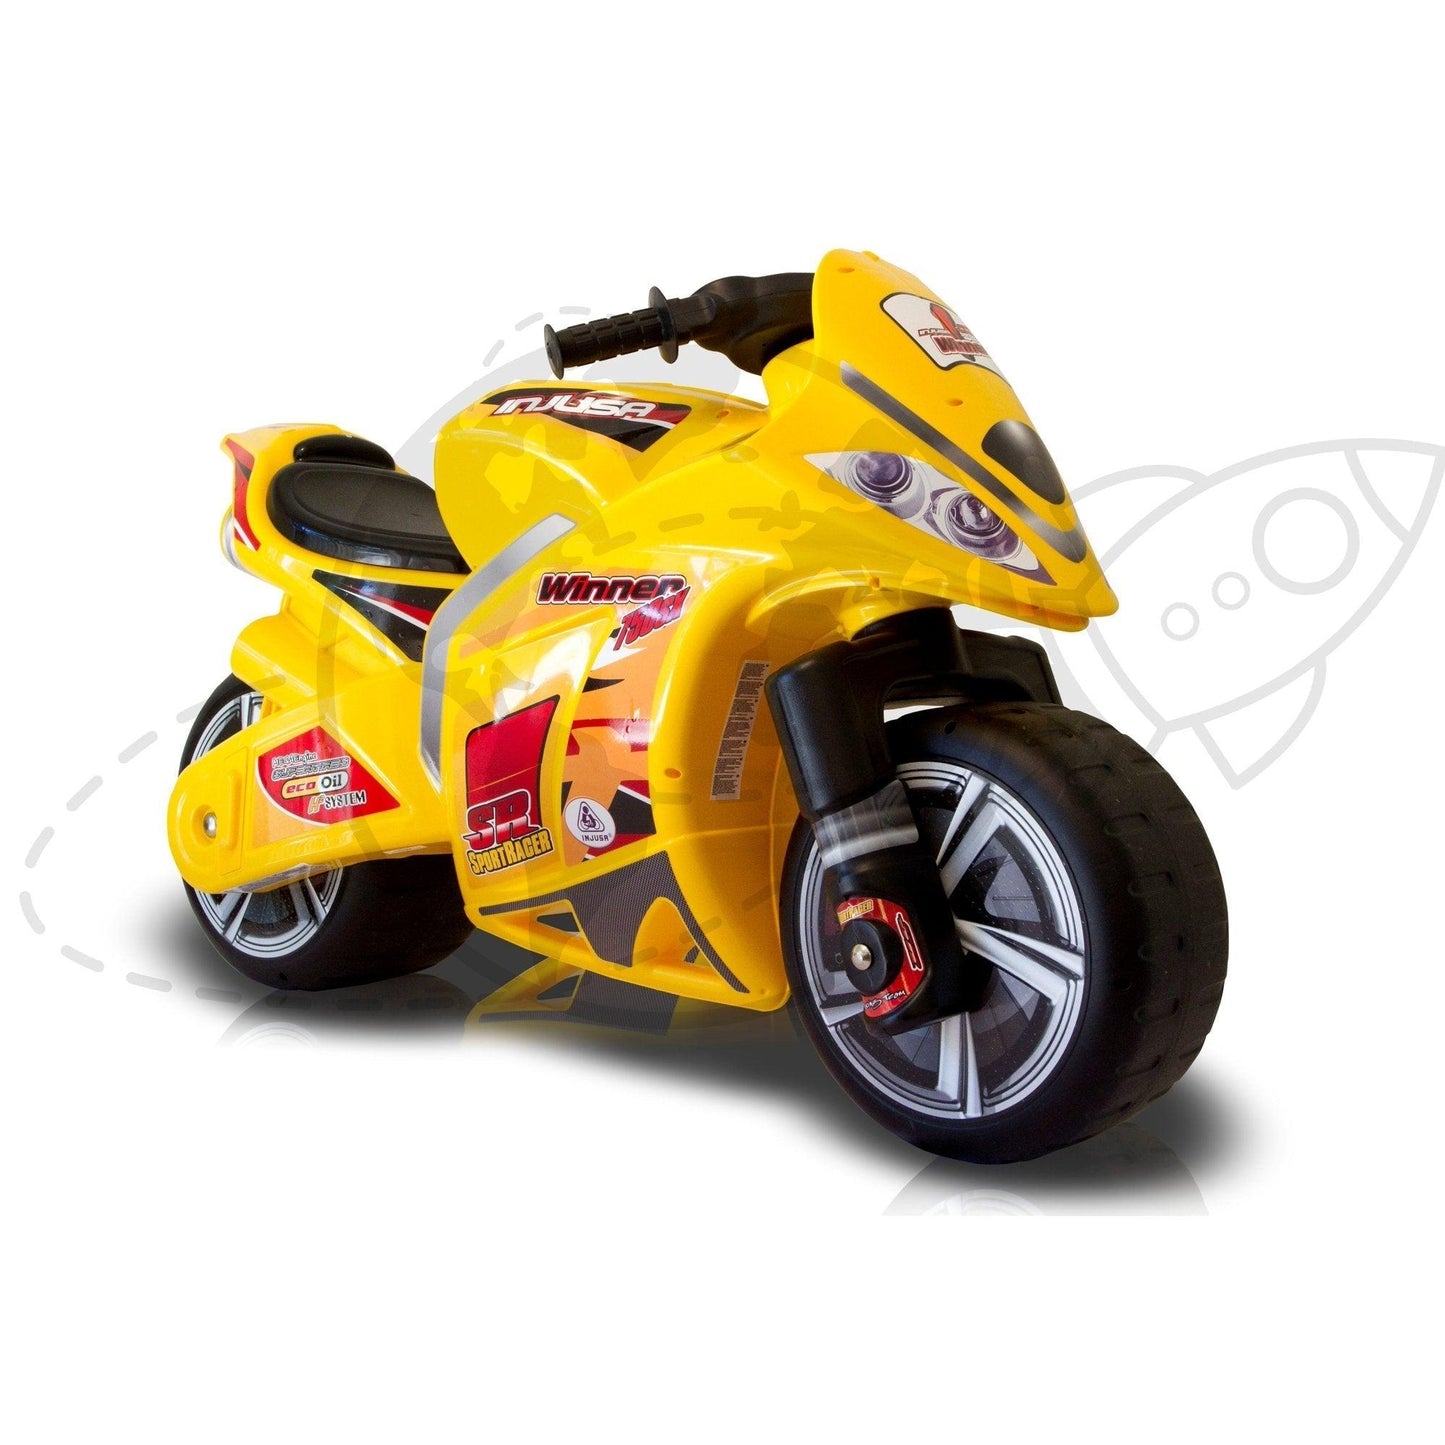 PATOYS | Injusa | Foot to Floor Winner Ride - on Yellow Recommended for Children 3+ - PATOYS